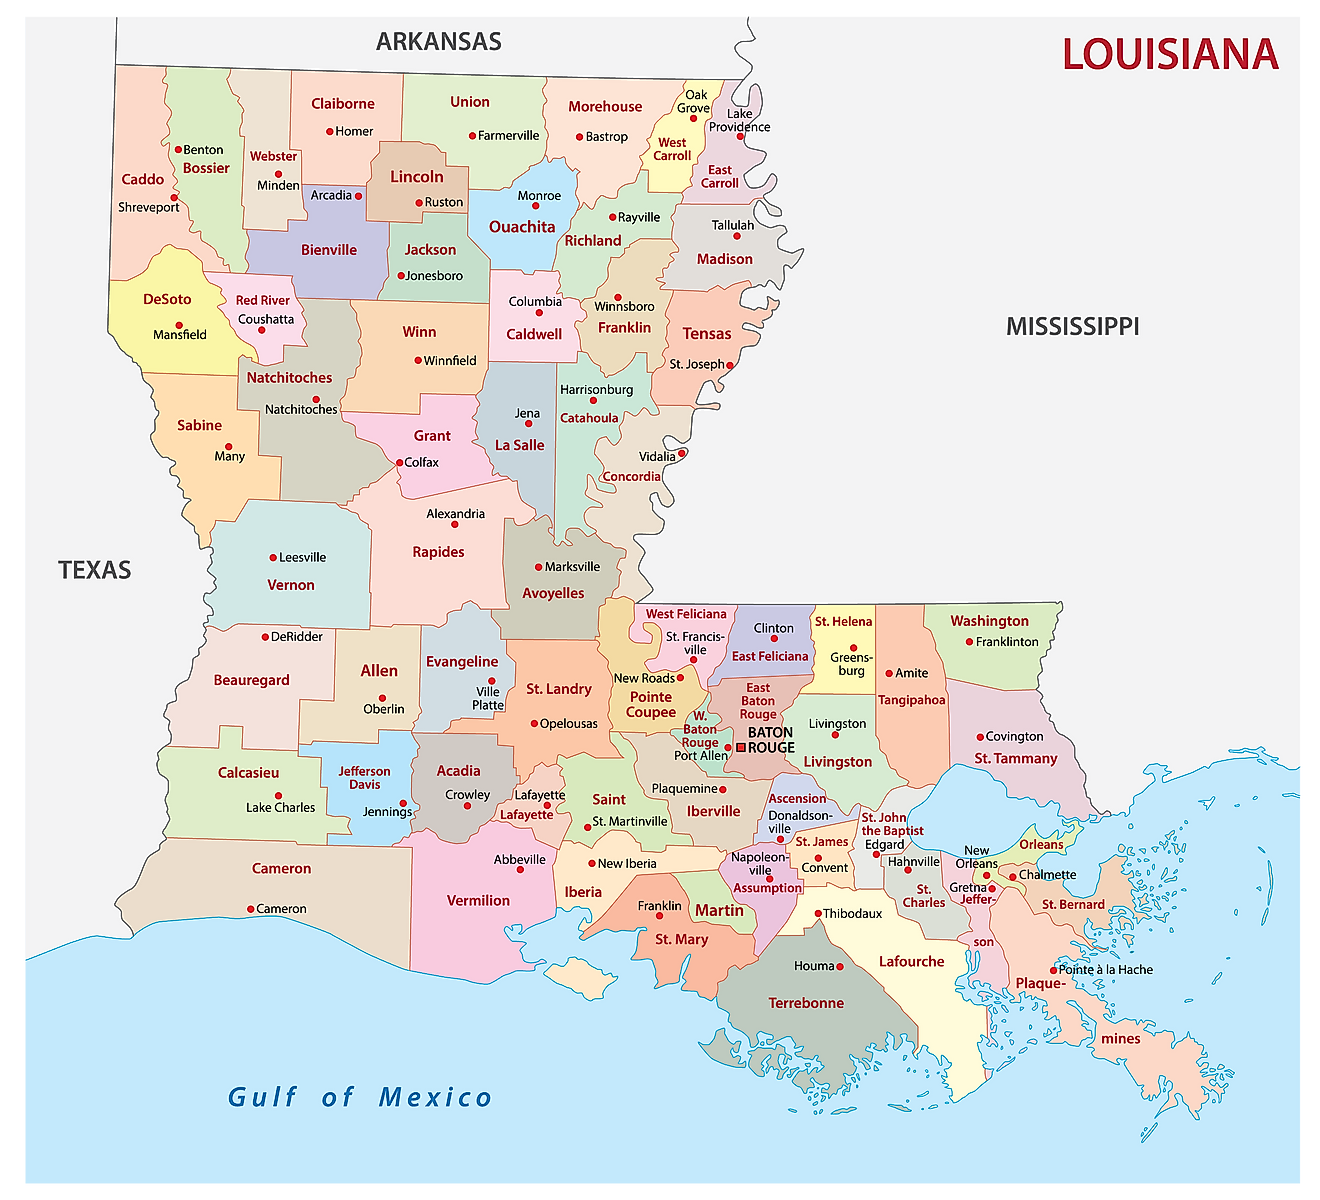 Administrative Map of Louisiana showing its 64 parishes and the capital city - Baton Rouge